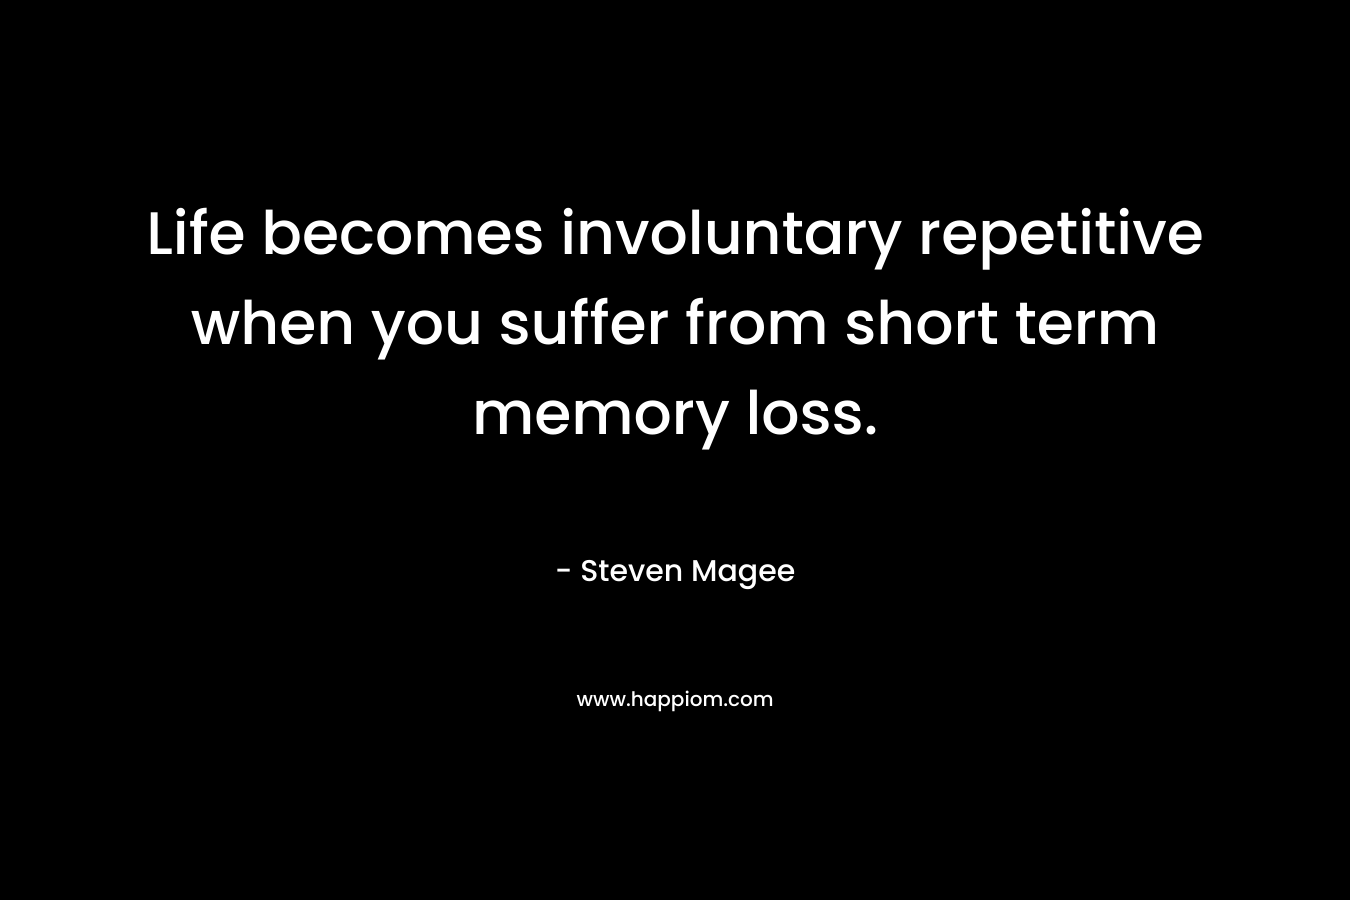 Life becomes involuntary repetitive when you suffer from short term memory loss.